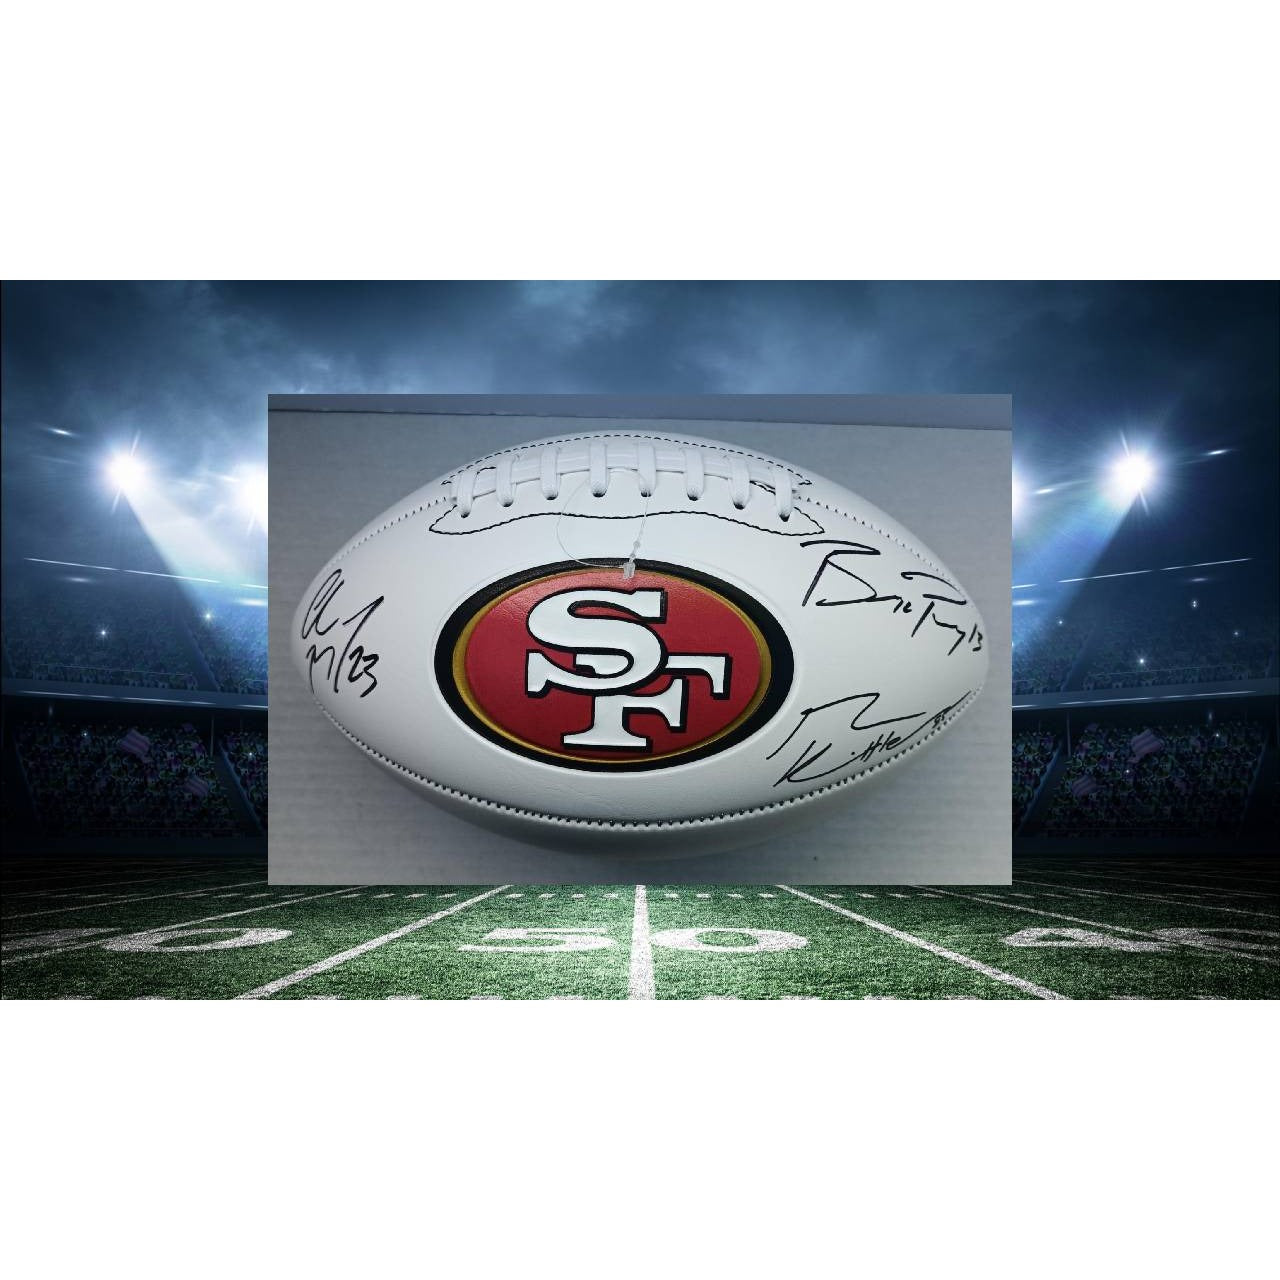 San Francisco 49ers Brock Purdy Christian McCaffrey George Kittle full size football signed with proof